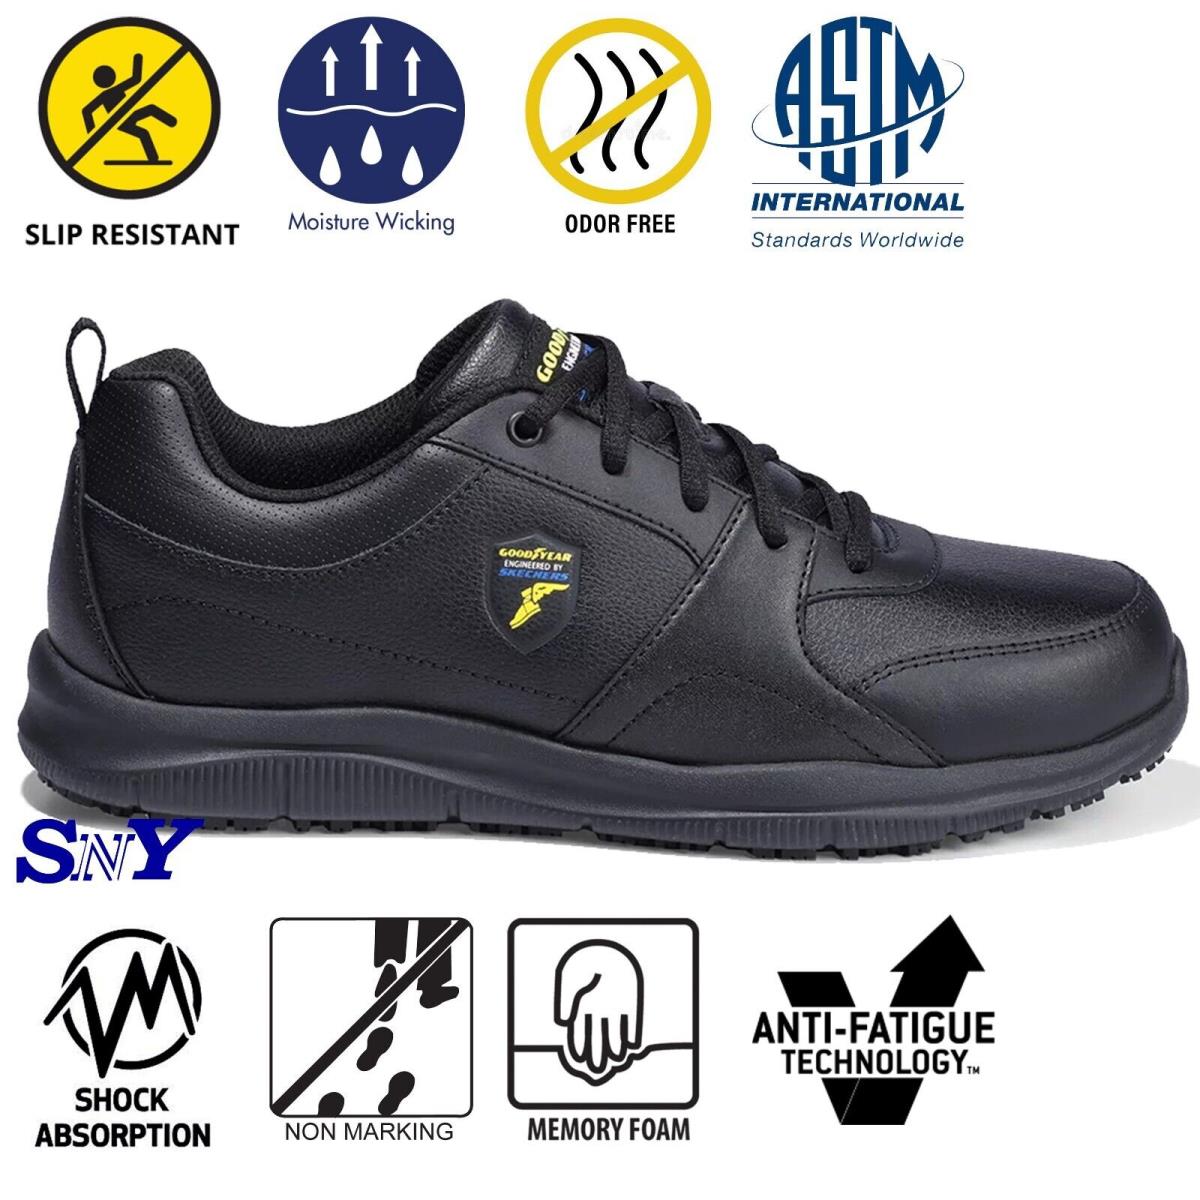 Skechers Goodyear Men`s Slip-resistant Lightweight Service Shoes Astm Rated M